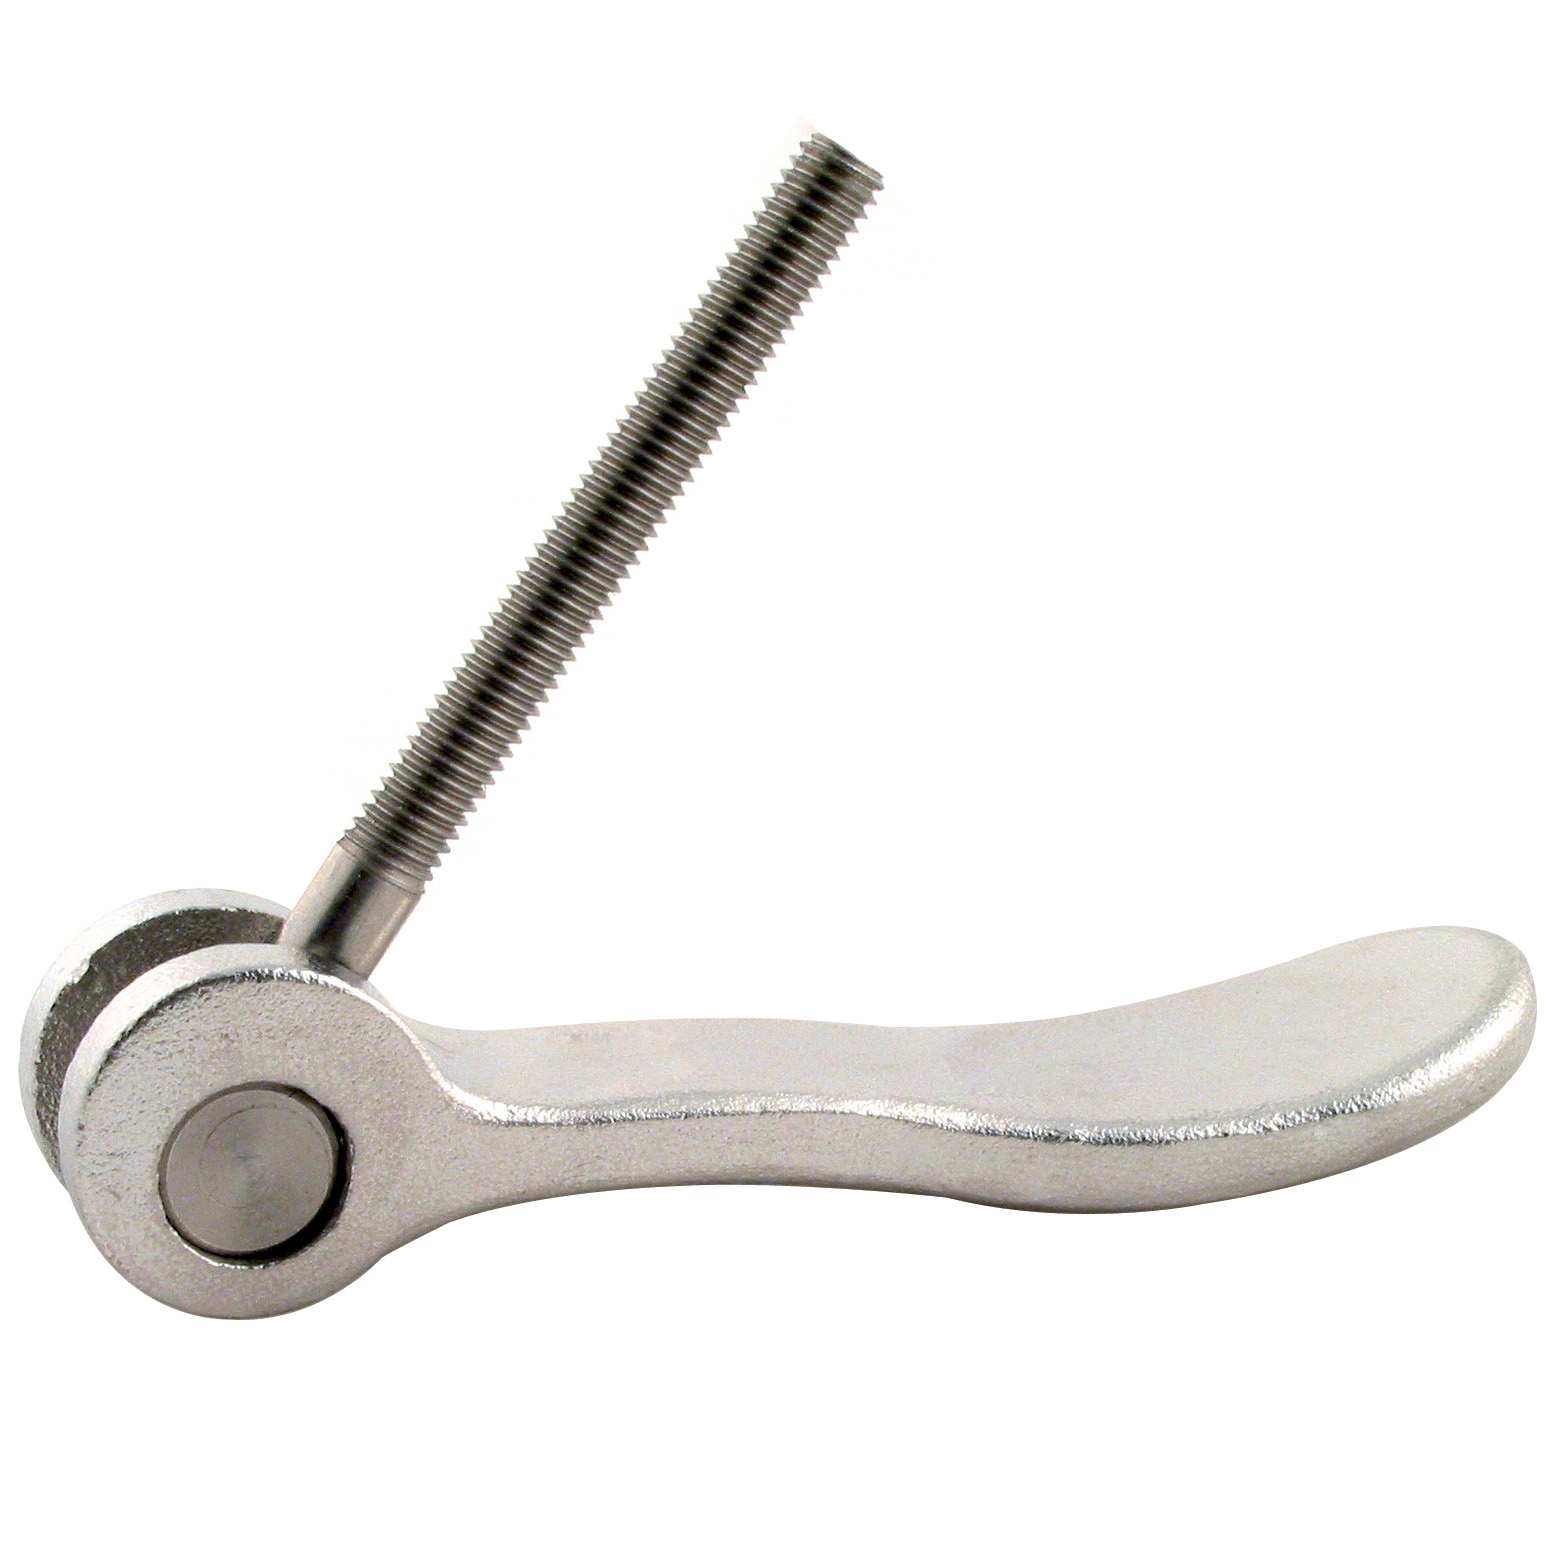 Adjustable Stainless steel cam lever - Male - thread - 